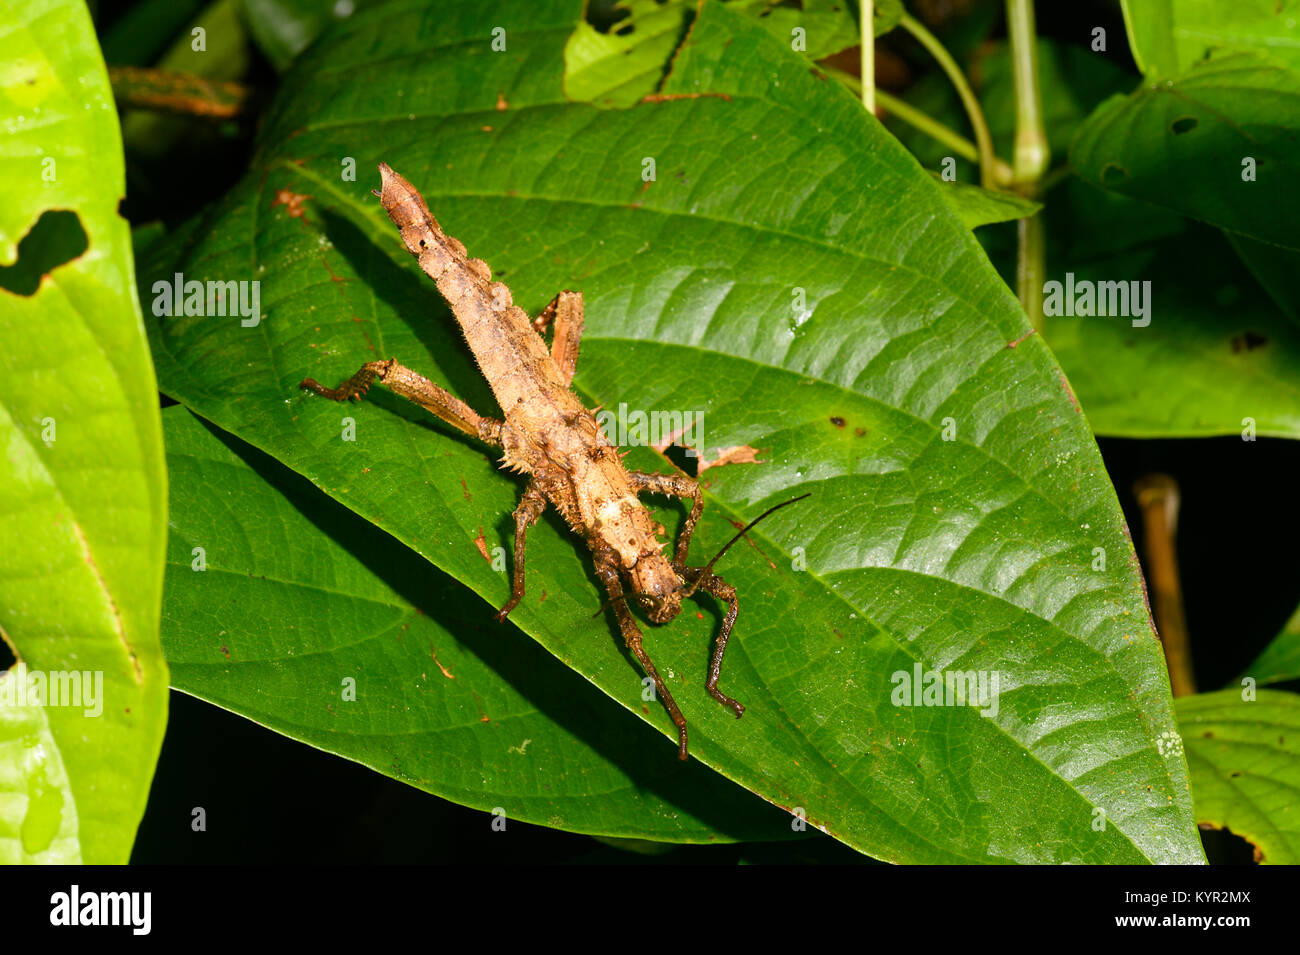 Malaysian Thorny Stick Bug Stheneboea repudiosa Spread Pair FAST FROM USA 